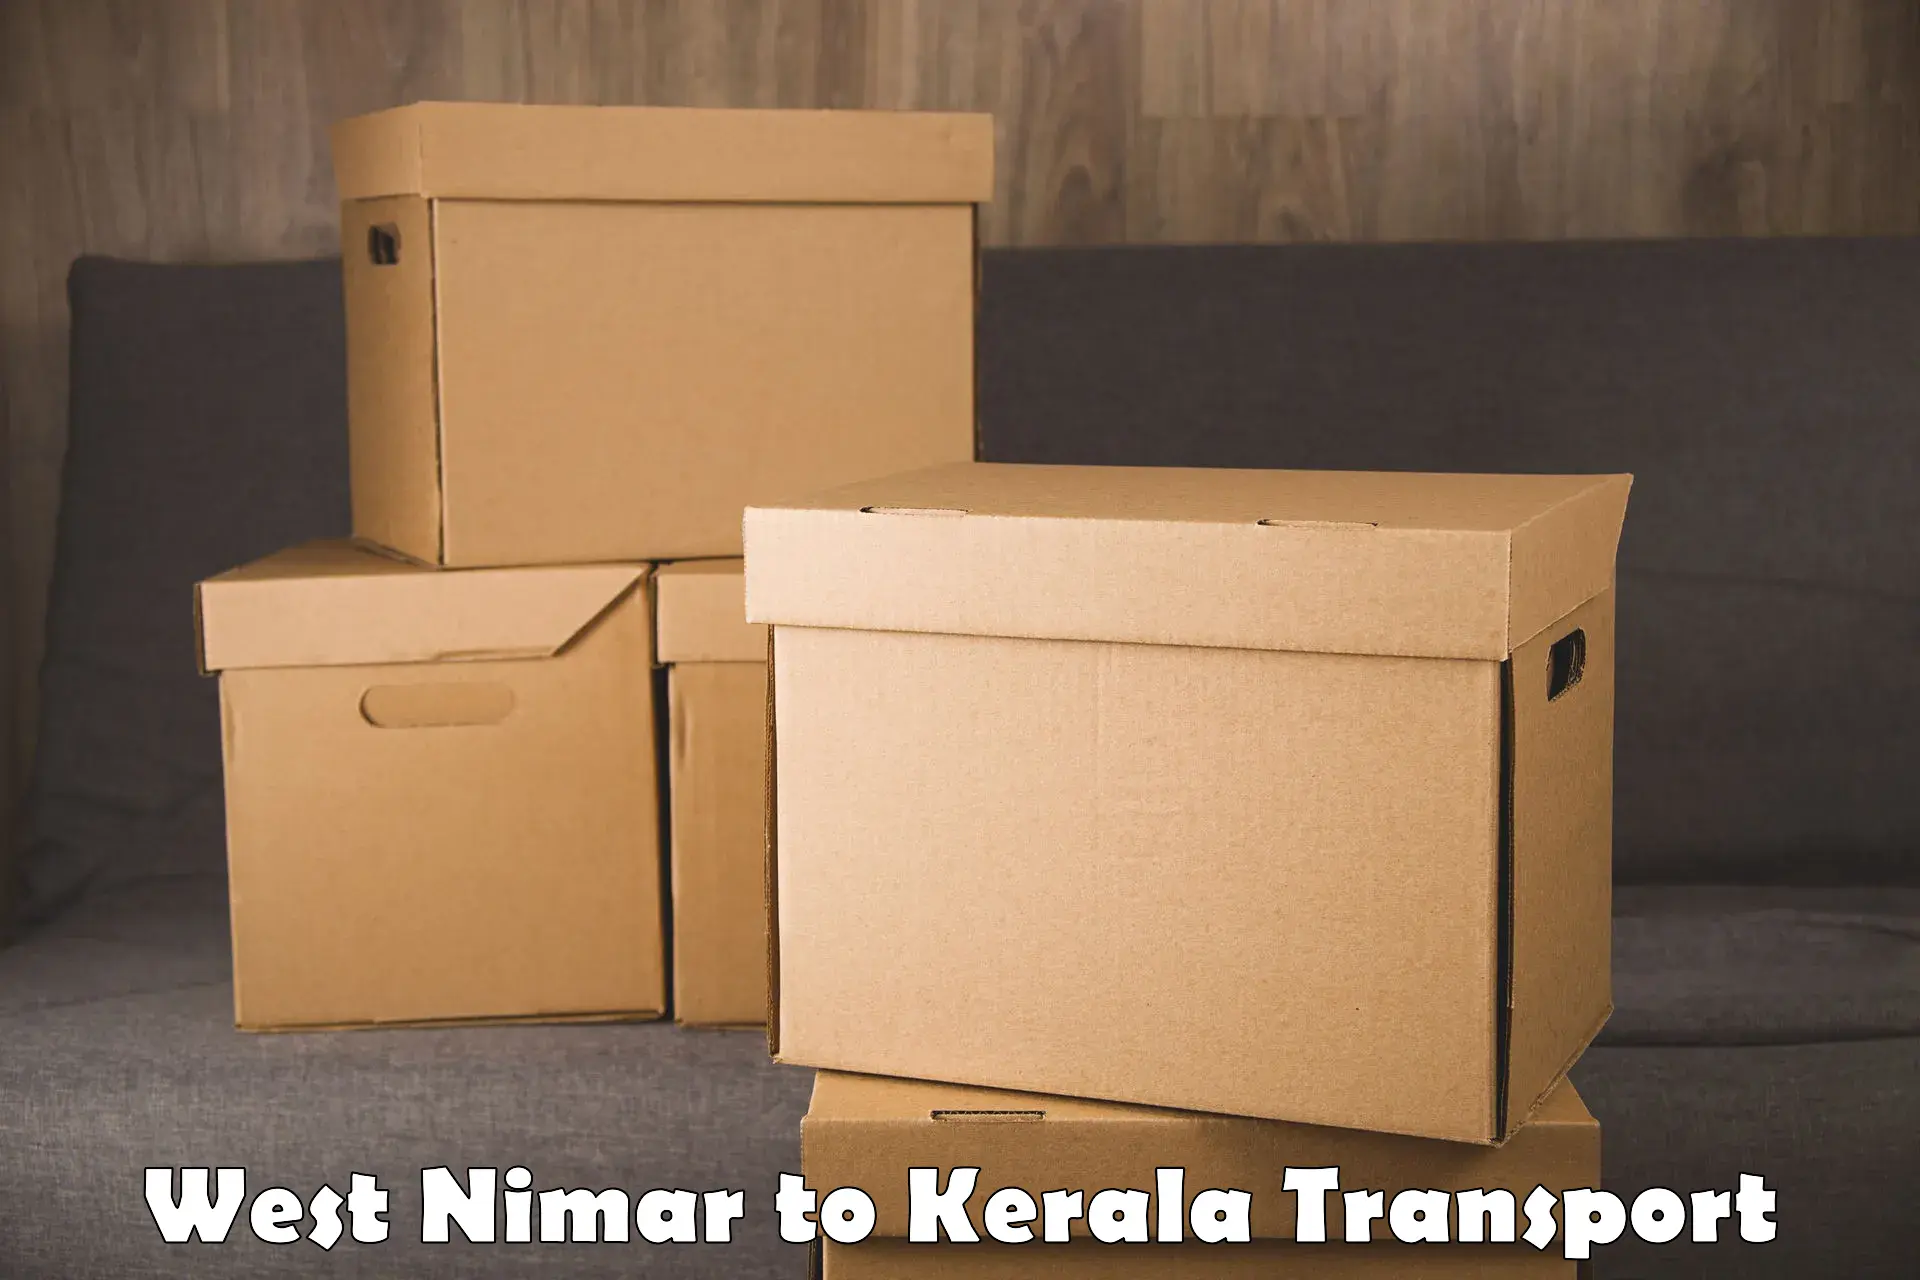 Express transport services West Nimar to Palakkad